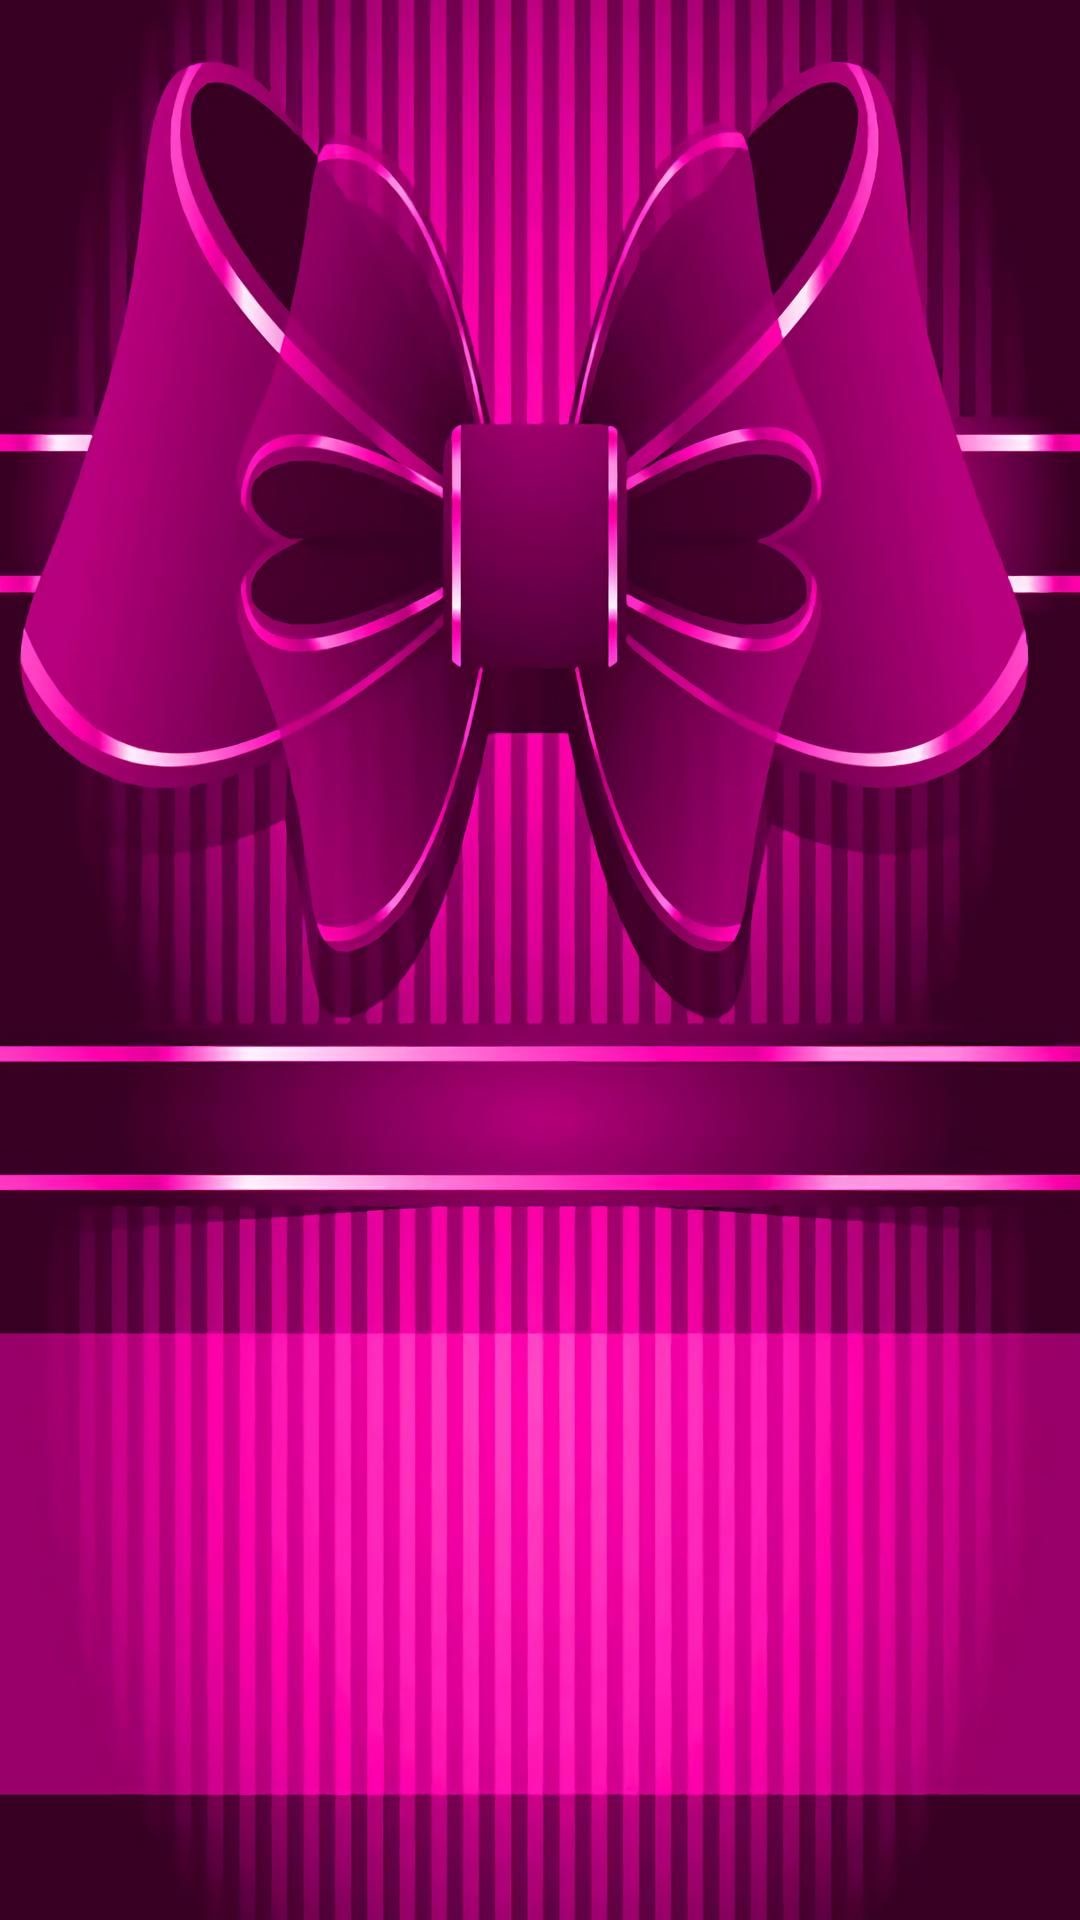 1080x Bow Wallpaper, Wallpaper Background, iPhone Wallpaper Bow Pink